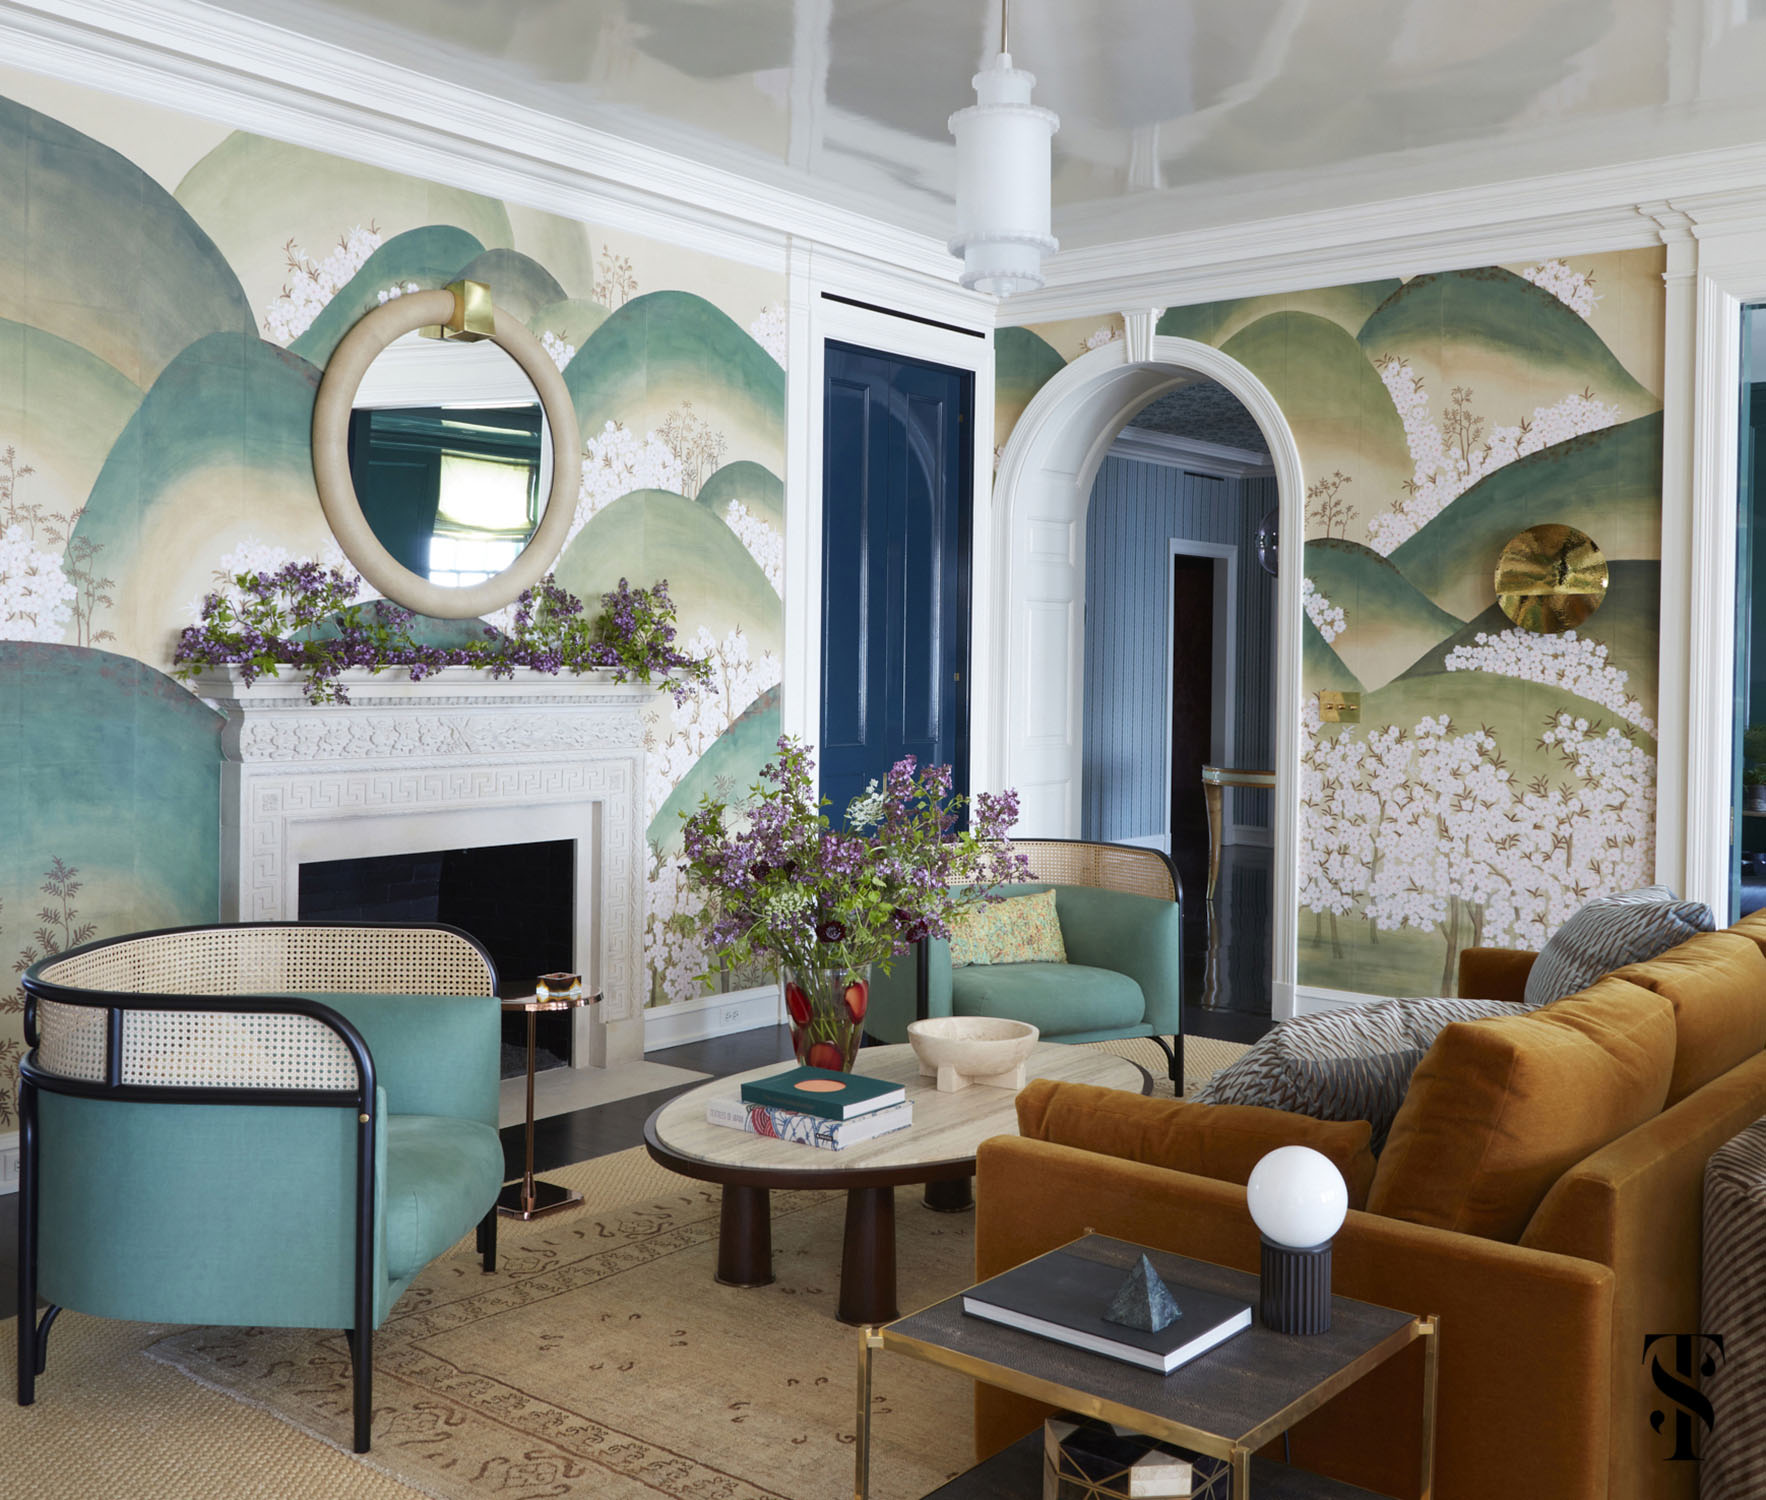 Summer Thornton designed coop with kiso mountains wallpaper by de Gournay